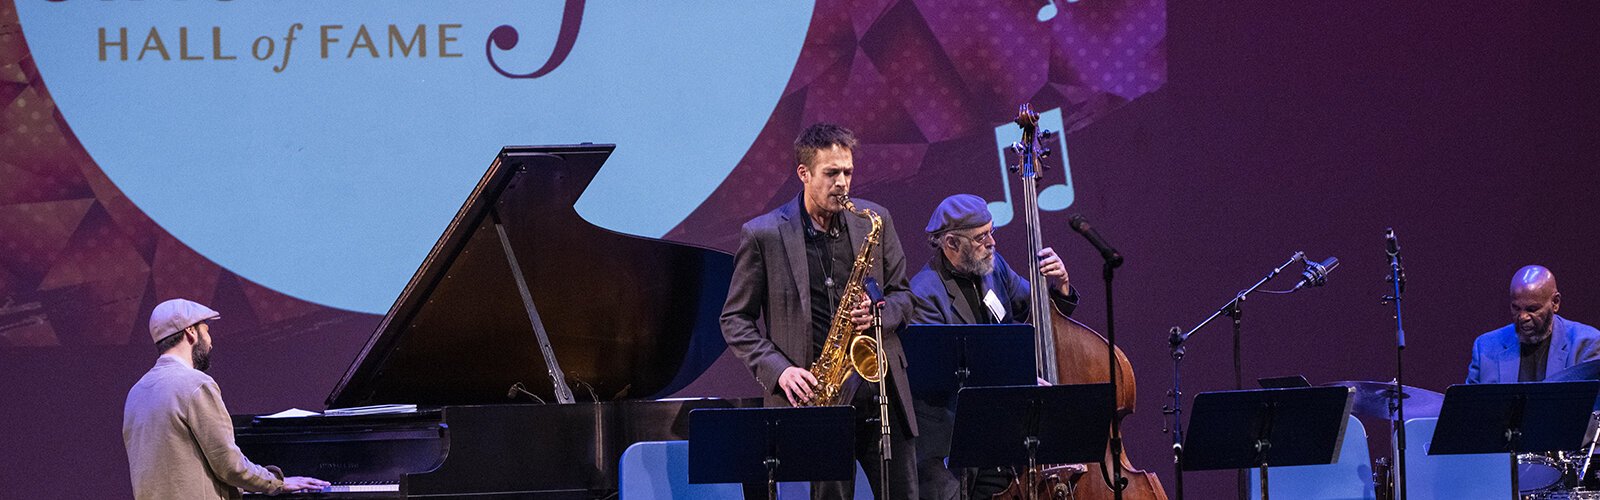 Retro Nouveau was among the groups that performed at the Hall of Fame event. Dan Karlsberg on piano, Josh Kline on sax, newly inducted Hall of Fame member Mike Sharfe on bass, Hall of Famer Melvin Broach on drums.